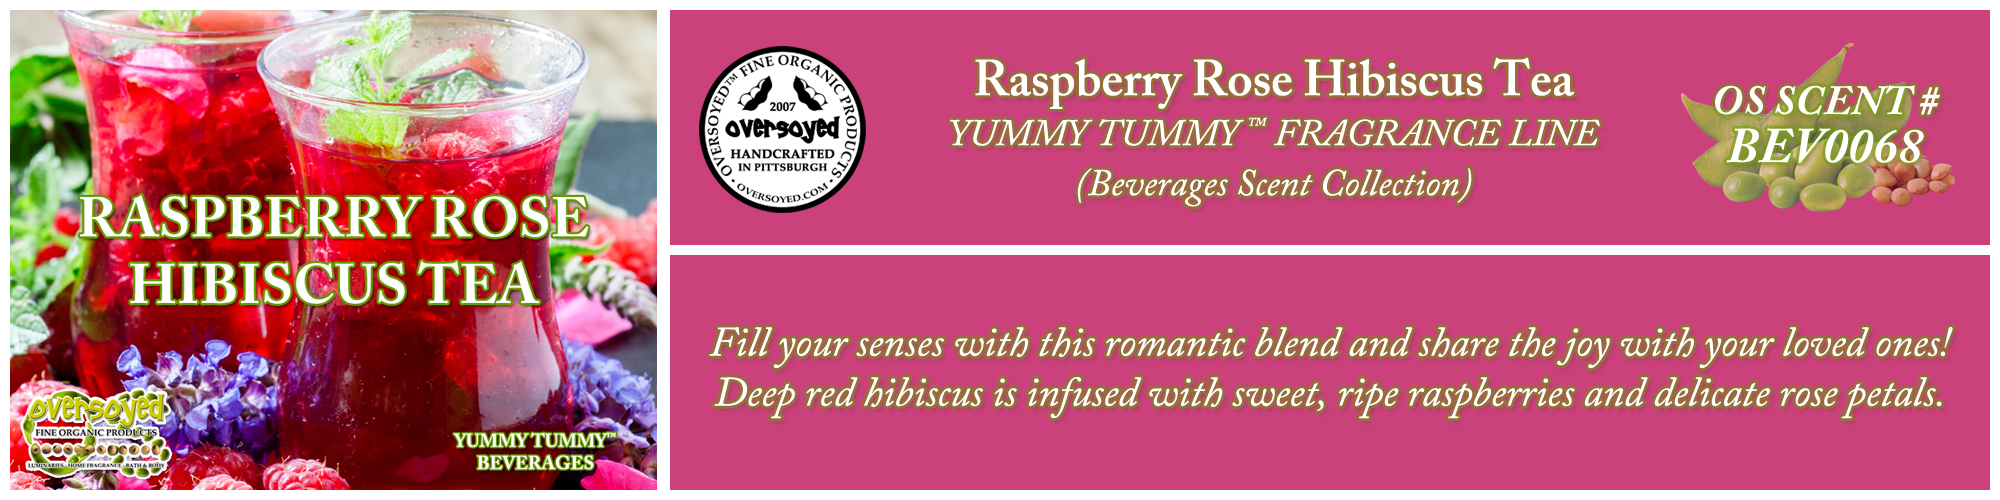 Raspberry Rose Hibiscus Tea Handcrafted Products Collection